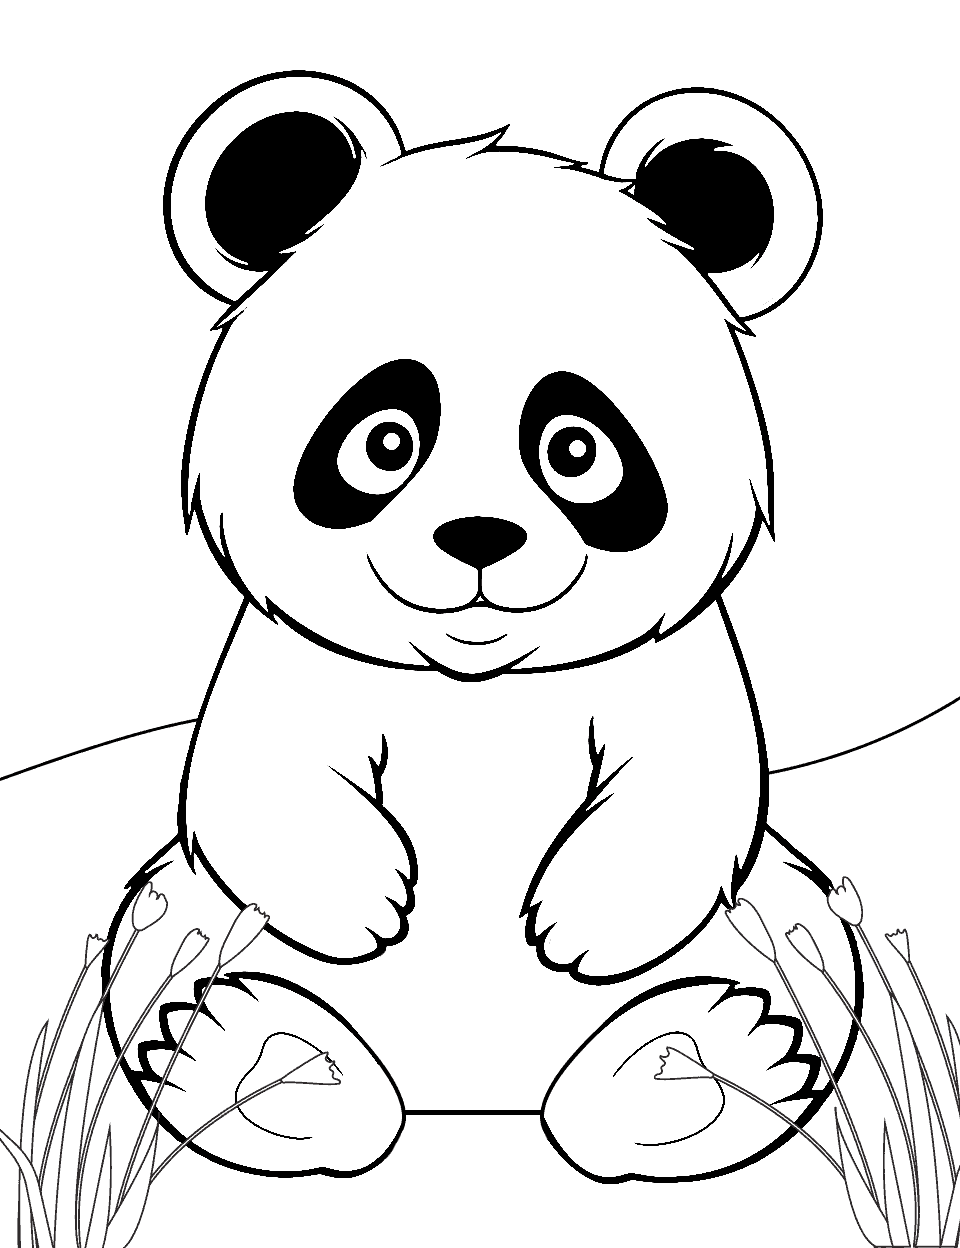 Easy Panda Sketch Coloring Page - A simple and easy-to-color image of a panda with a minimal background.